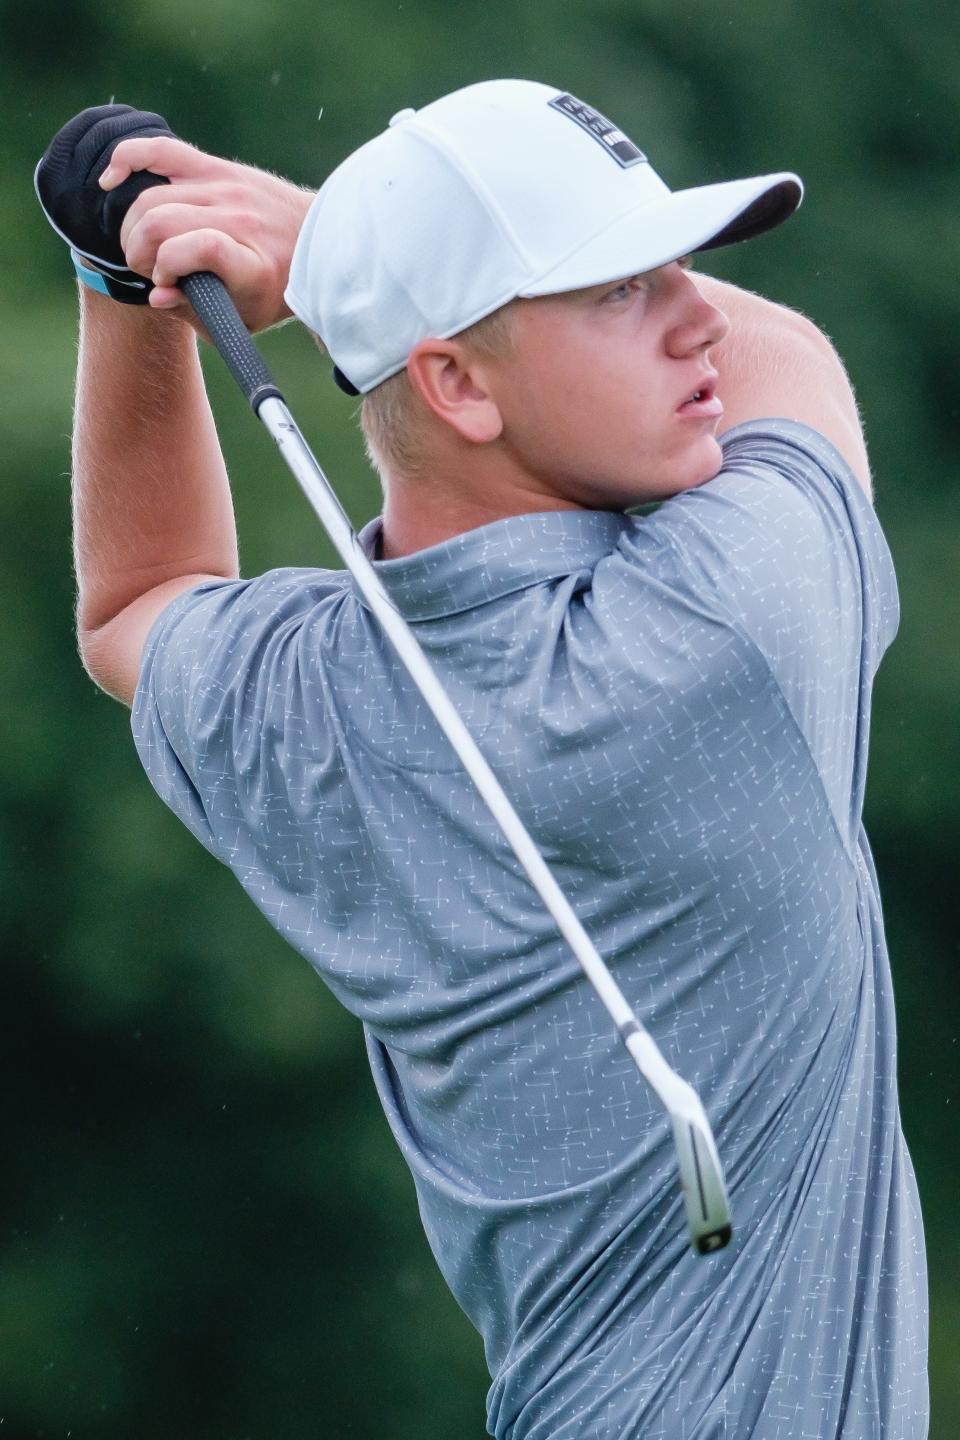 Garaway's Trace Gibson tees off during the Tuscarawas Central Catholic Cibo's Invitational, Wednesday, Aug. 10 at Union Country Club in Dover.